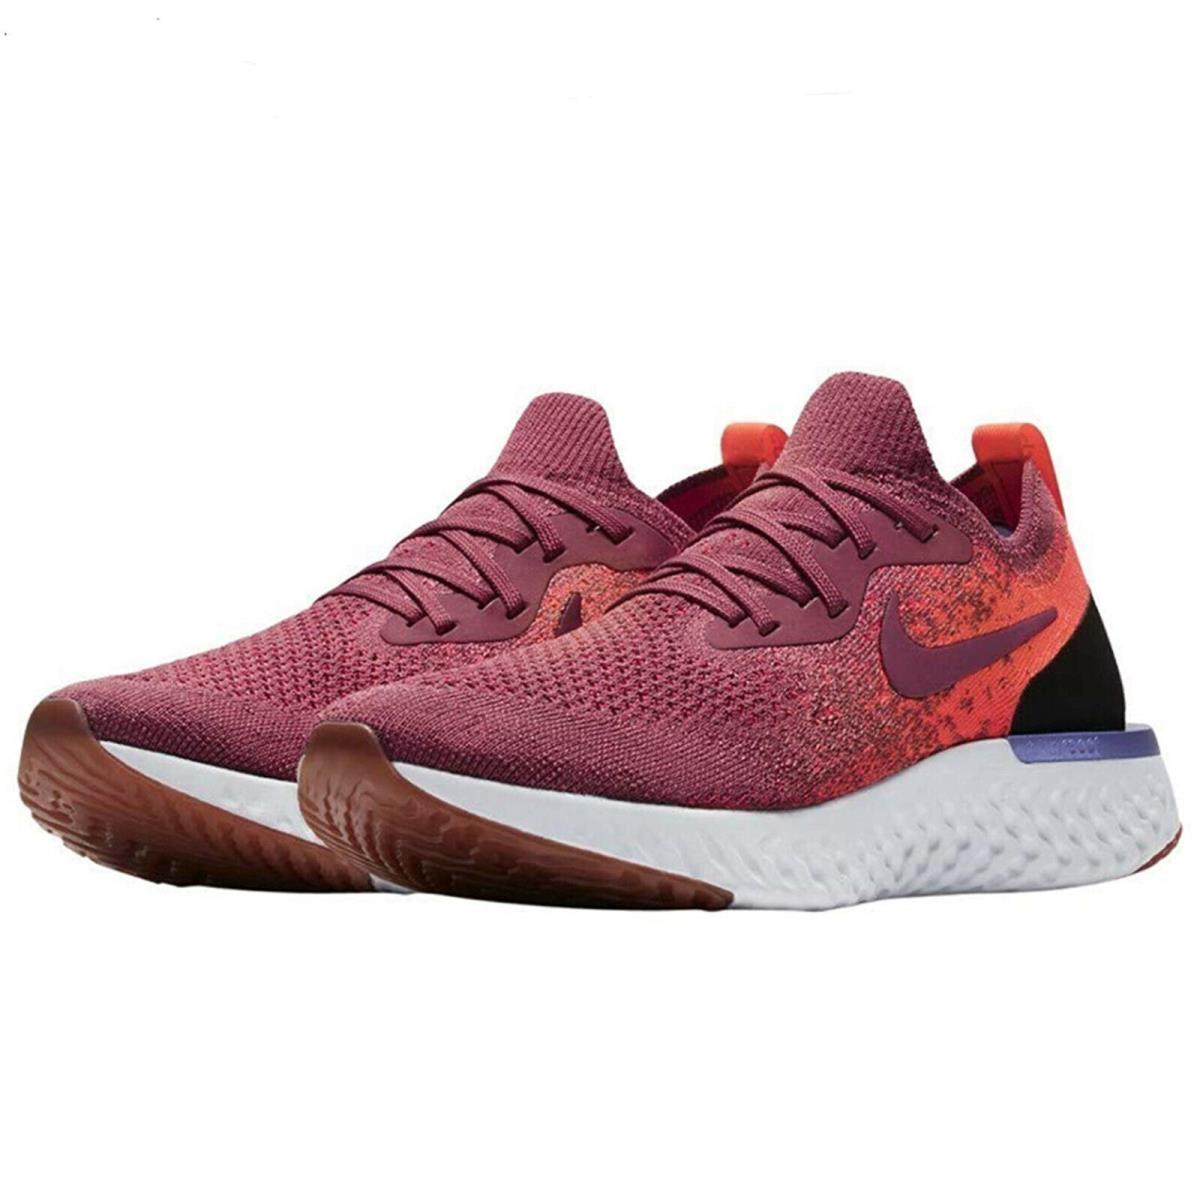 Women`s Nike Epic React Flyknit <AQ0070 - 601> Running/casual Shoe.new with Box - VINTAGE WINE/VINTAGE WINE